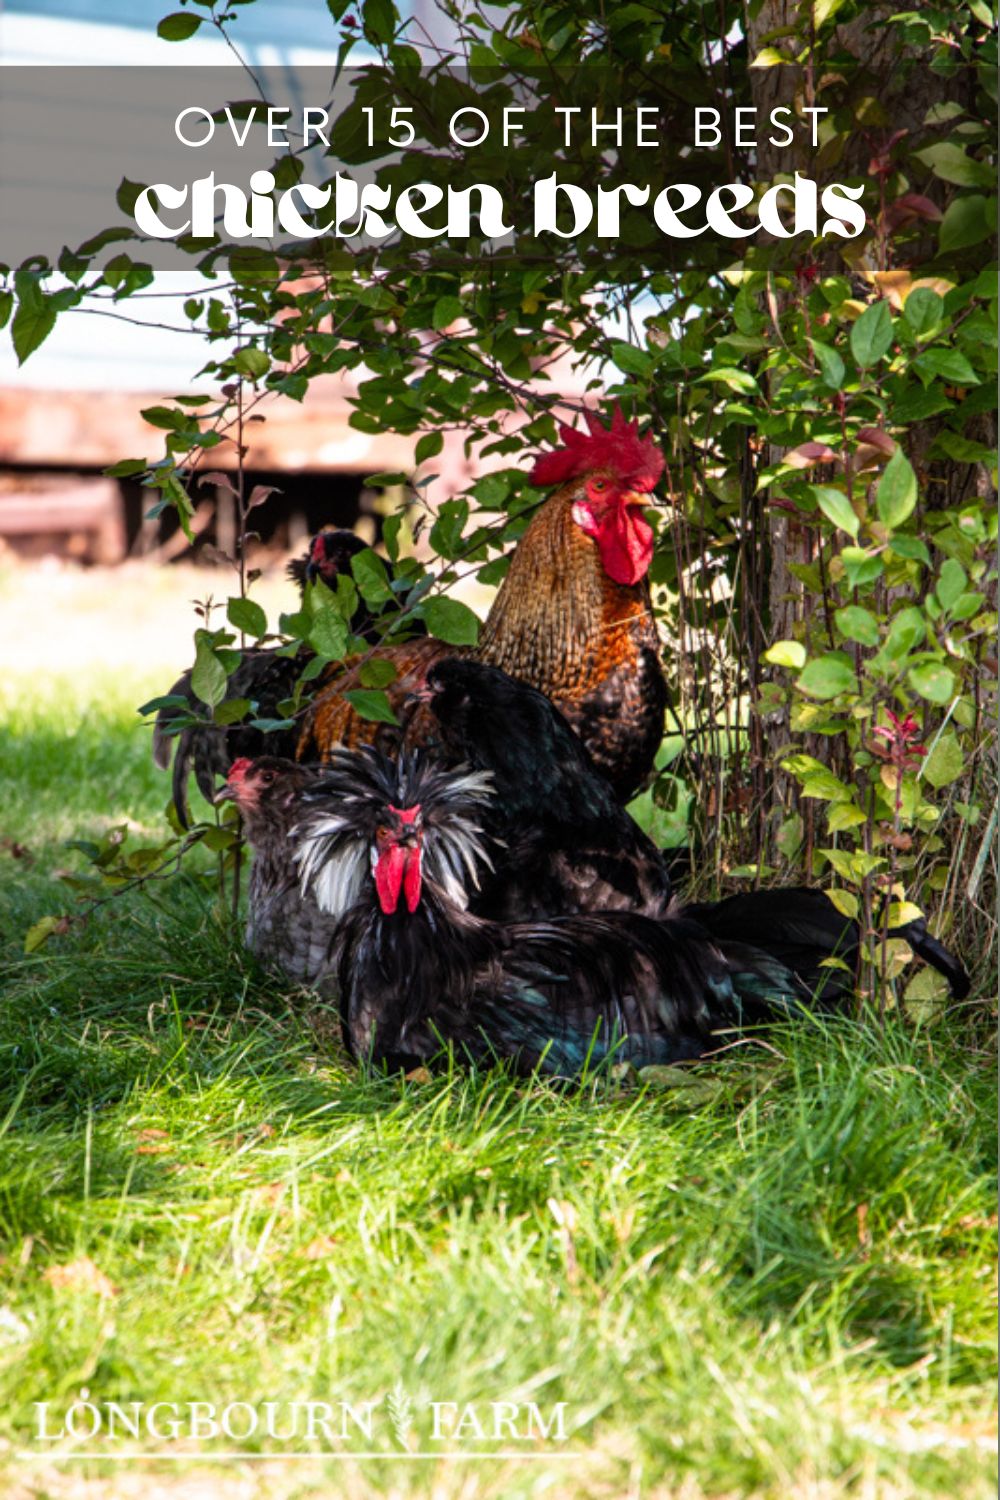 In addition to picking out the right breed or combination of breeds for your backyard chicken coop, there are a few key characteristics that make a good backyard chicken. This article will outline the characteristics of a good backyard chicken and go over different breeds and breed terminology.